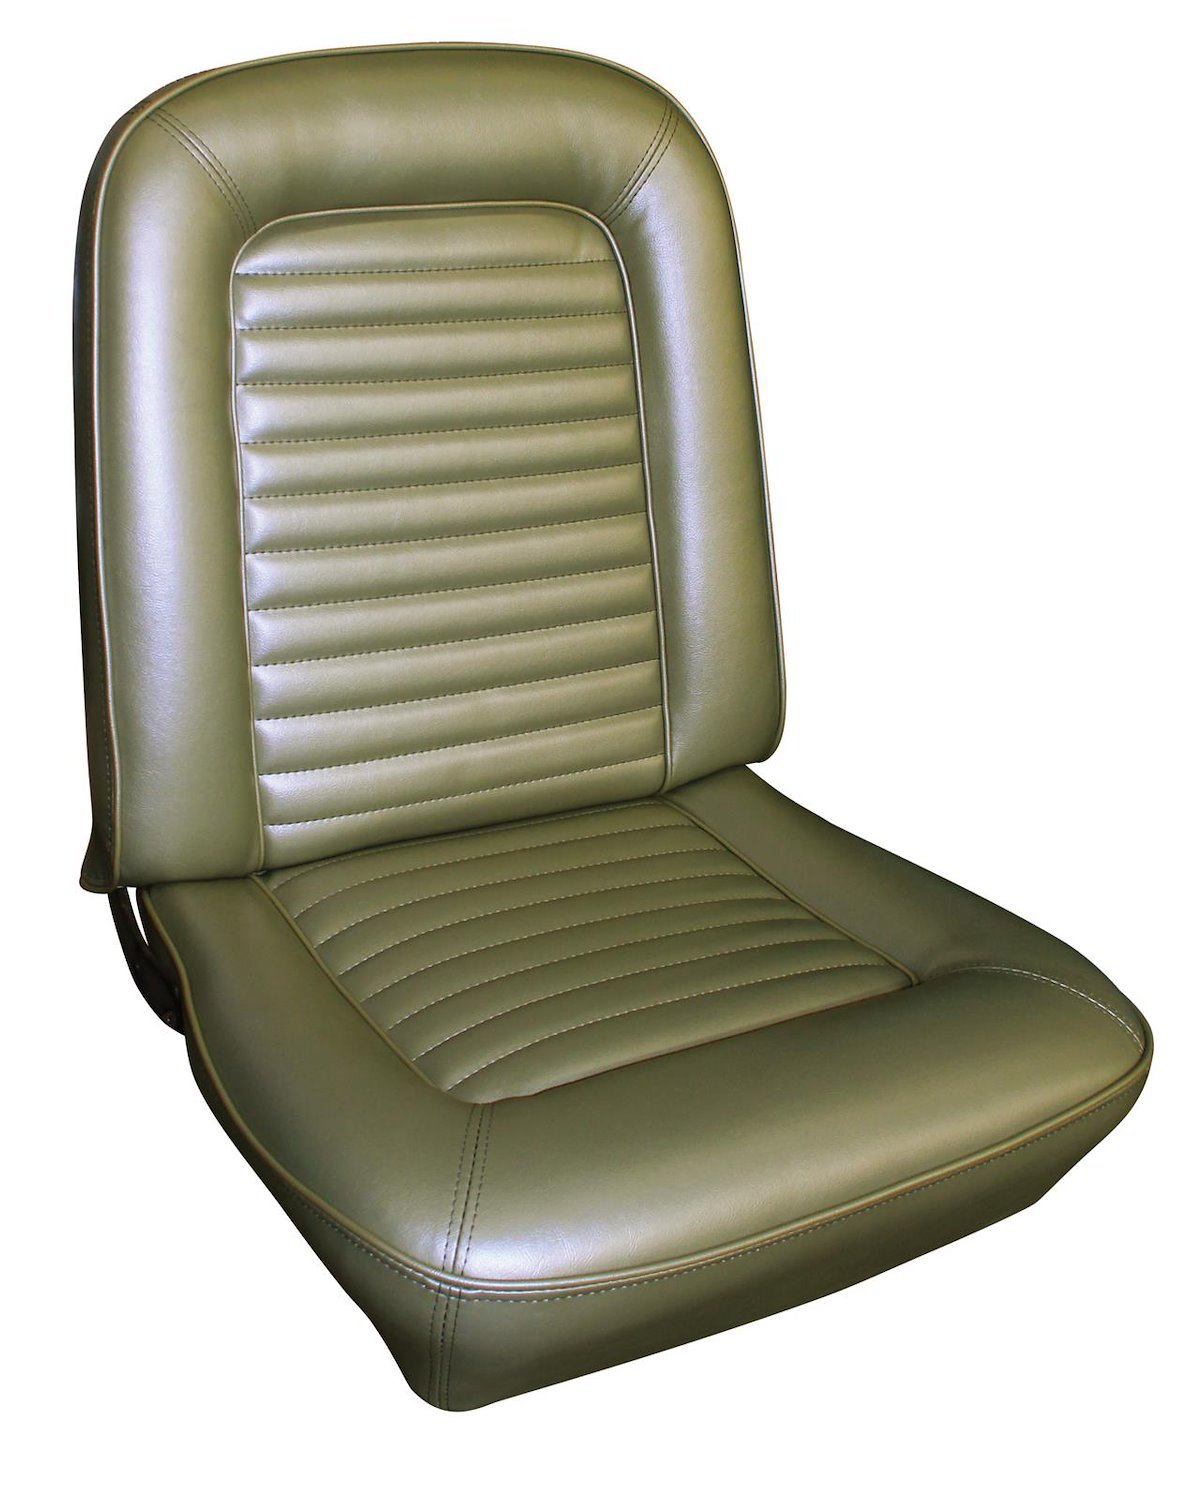 1968 Ford Mustang Deluxe Interior Front Bucket Seat Upholstery Set